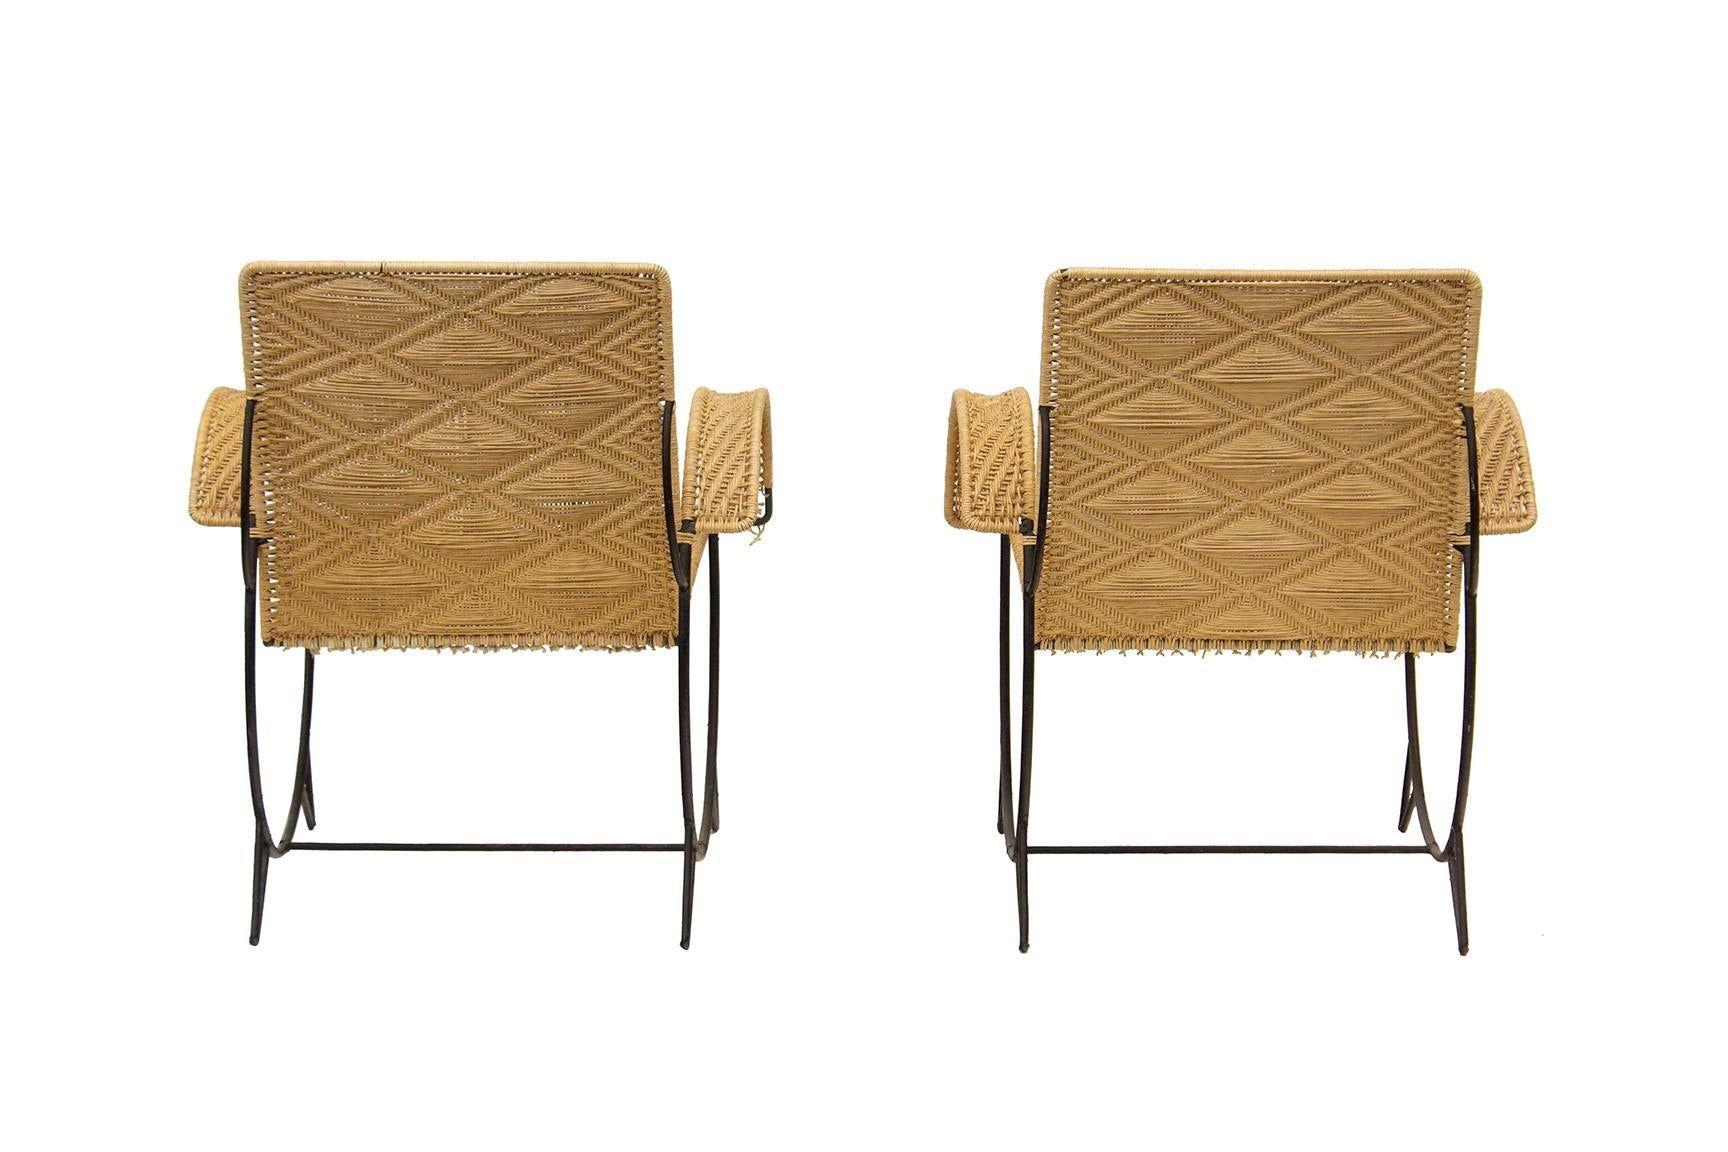 Mid-20th Century Pair of Iron Hoop Chairs For Sale